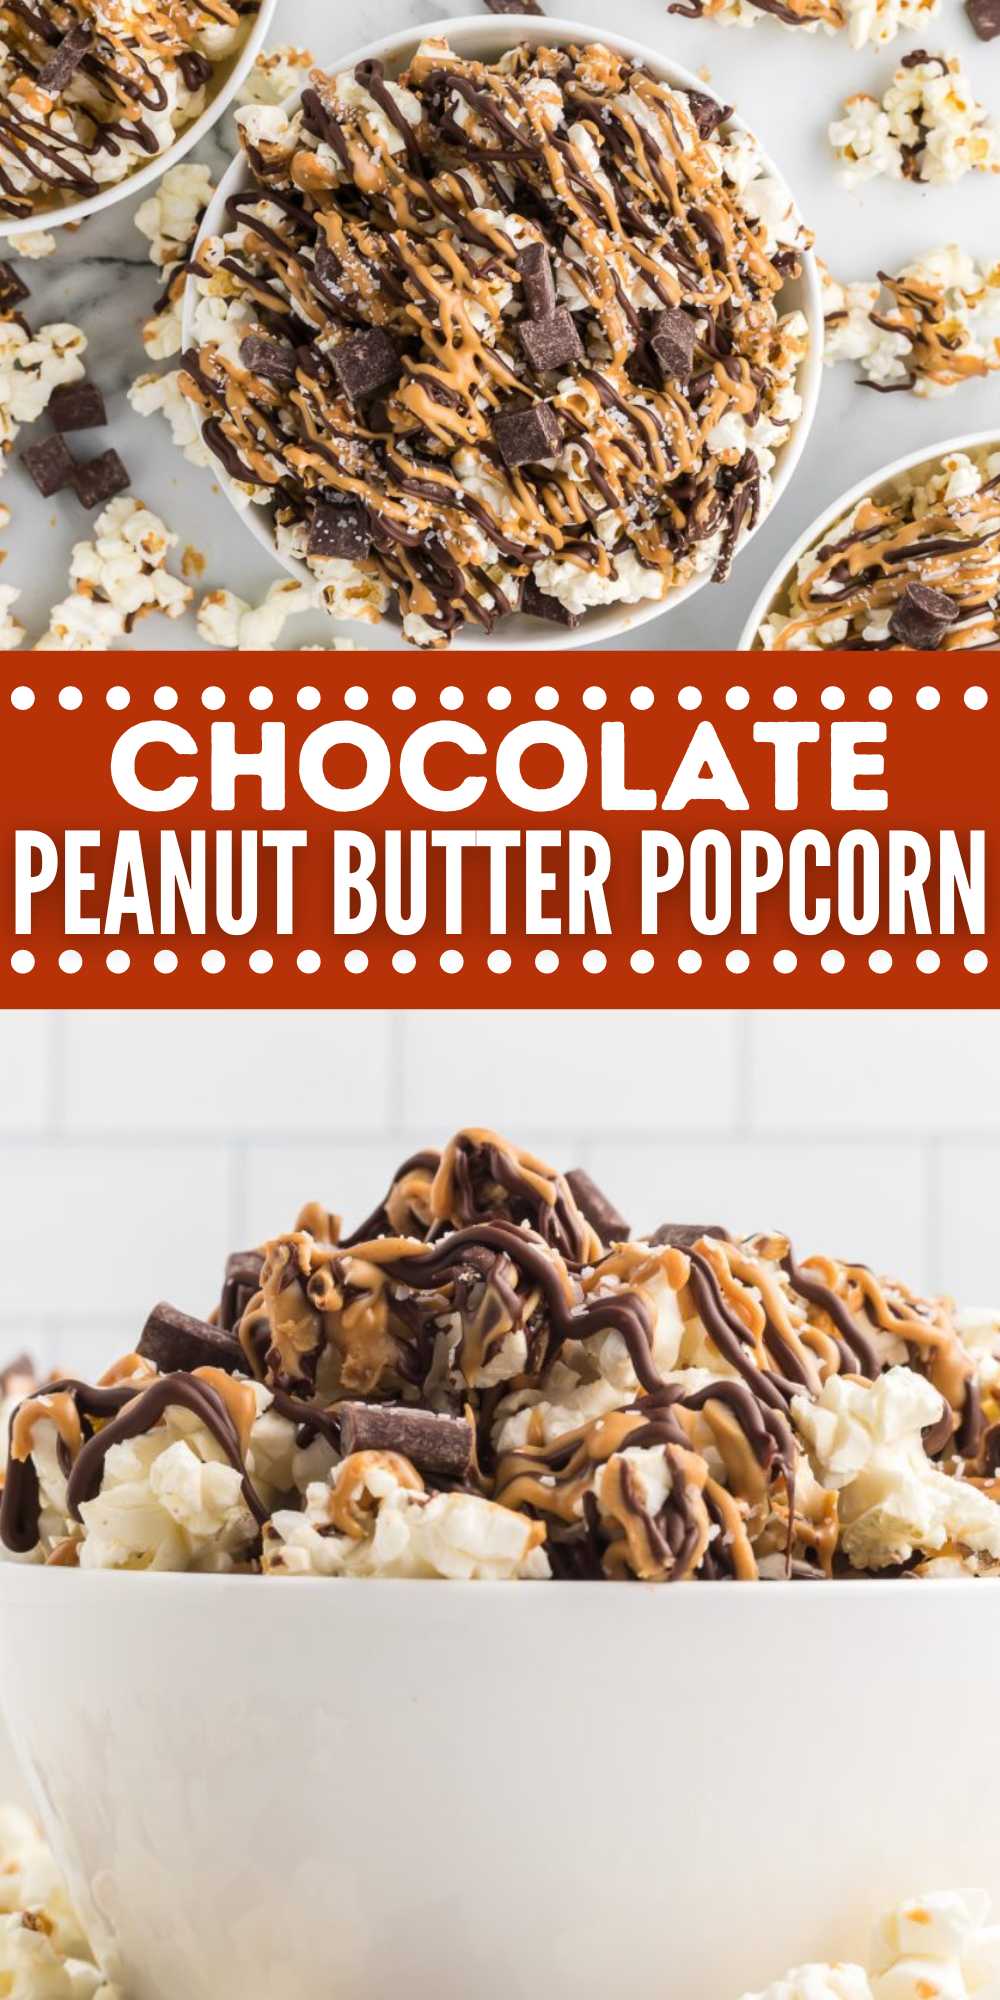 If you are needing a fun and easy snack, make Chocolate Peanut Butter Popcorn. Loaded with sweet and salty flavor that is always delicious. This sweet treat is budget friendly and perfect for any occasion. Feel free to add different chocolate chips or candy to make it your own. This popcorn mixture would also make the perfect holiday gift. #eatingonadime #chocolatepeanutbutterpopcorn #popcornrecipe